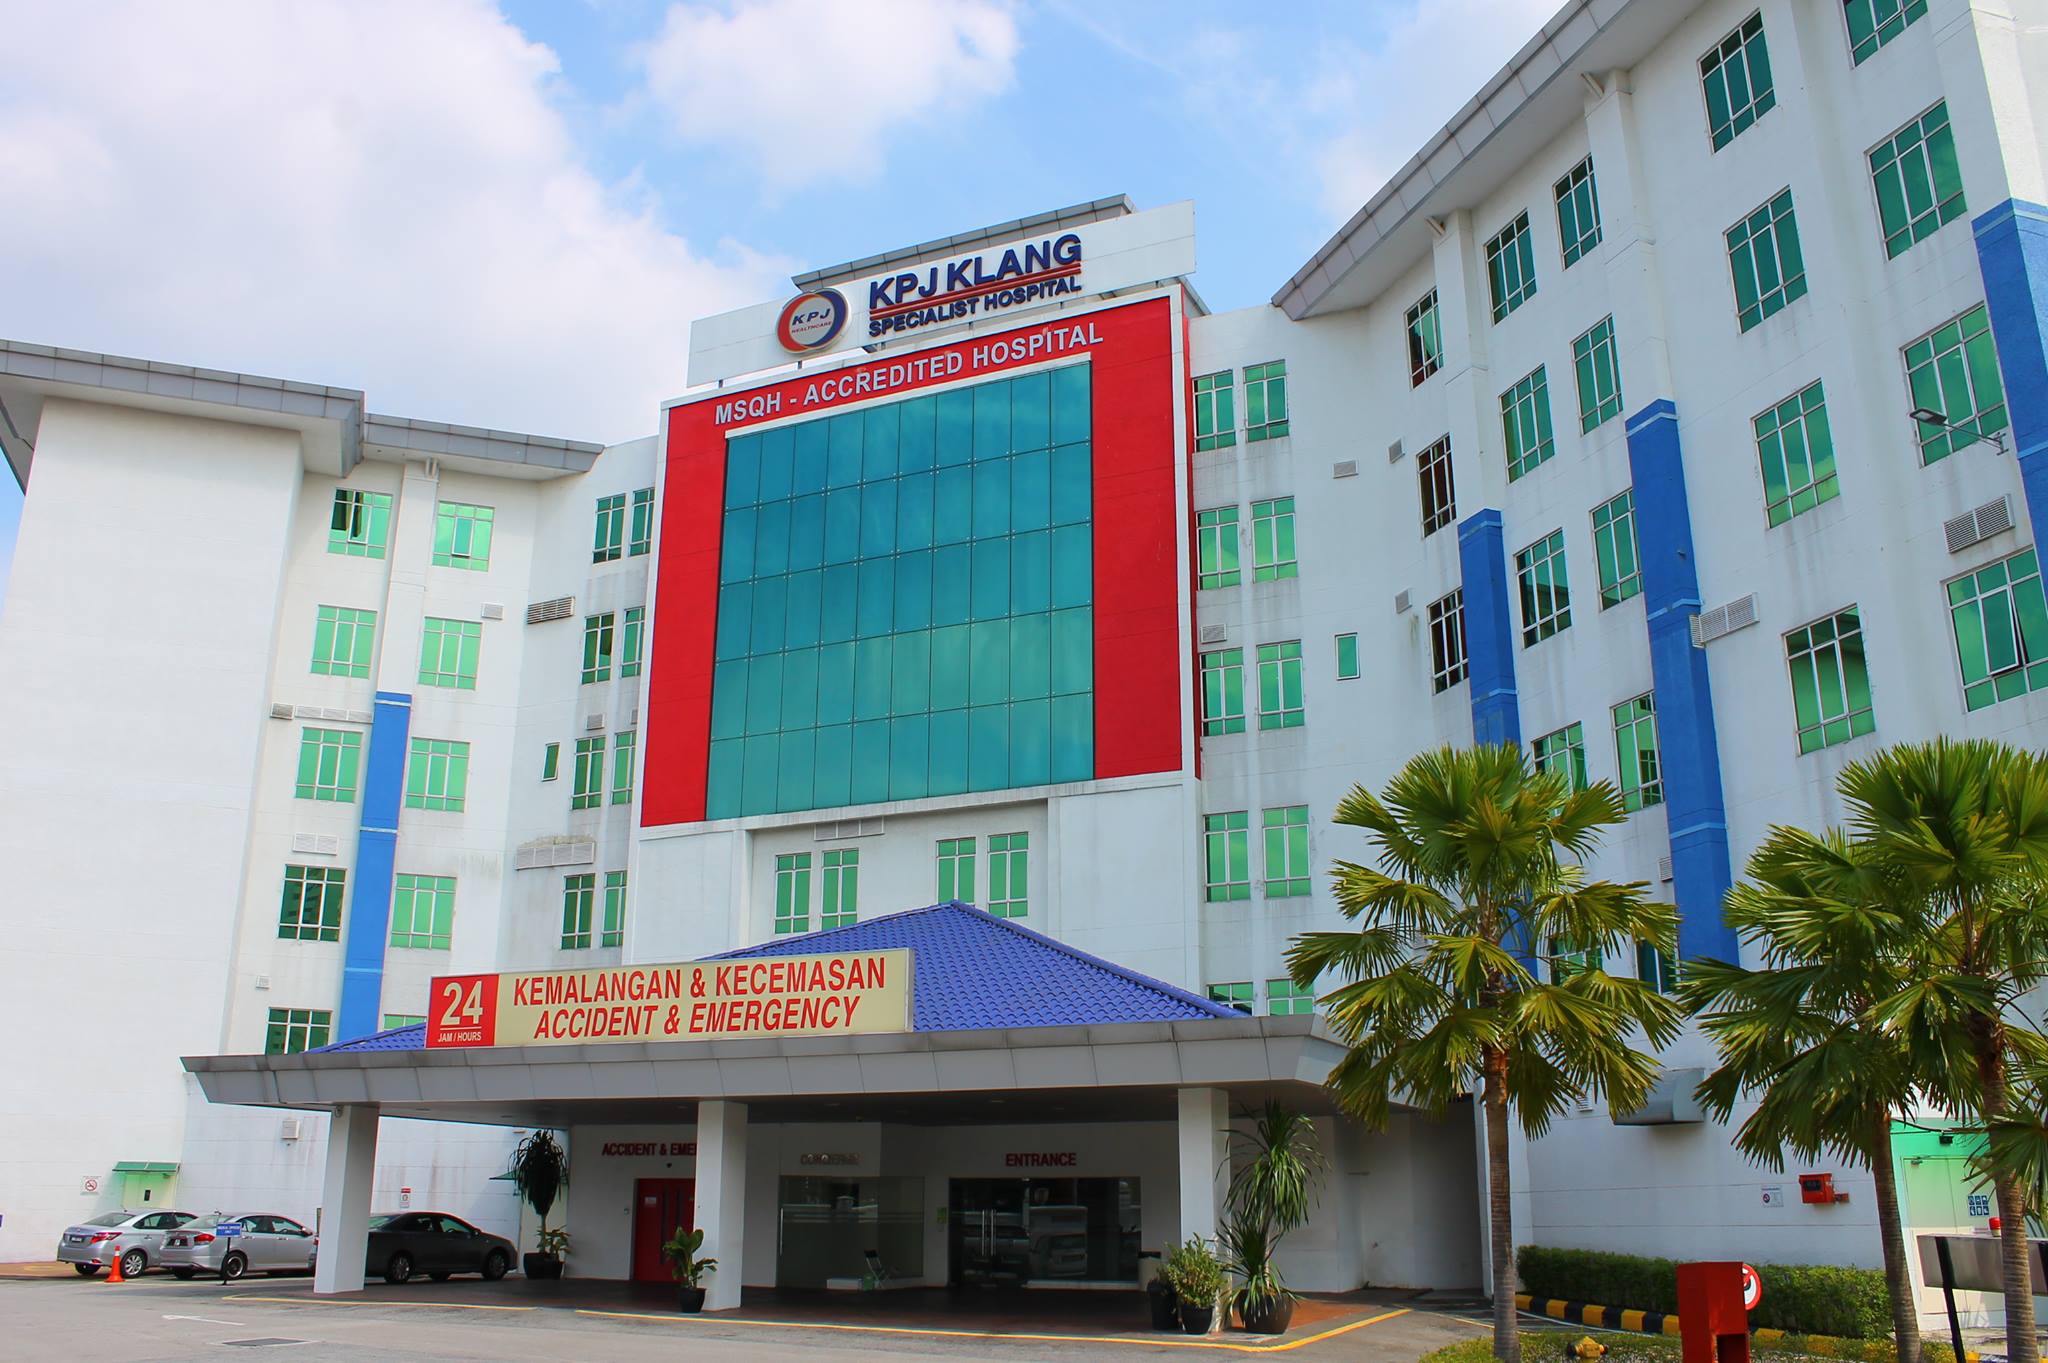 KPJ Healthcare has since issued a statement over the kolam incident and said that the men involved are suspended. Image credit: Smarter Health